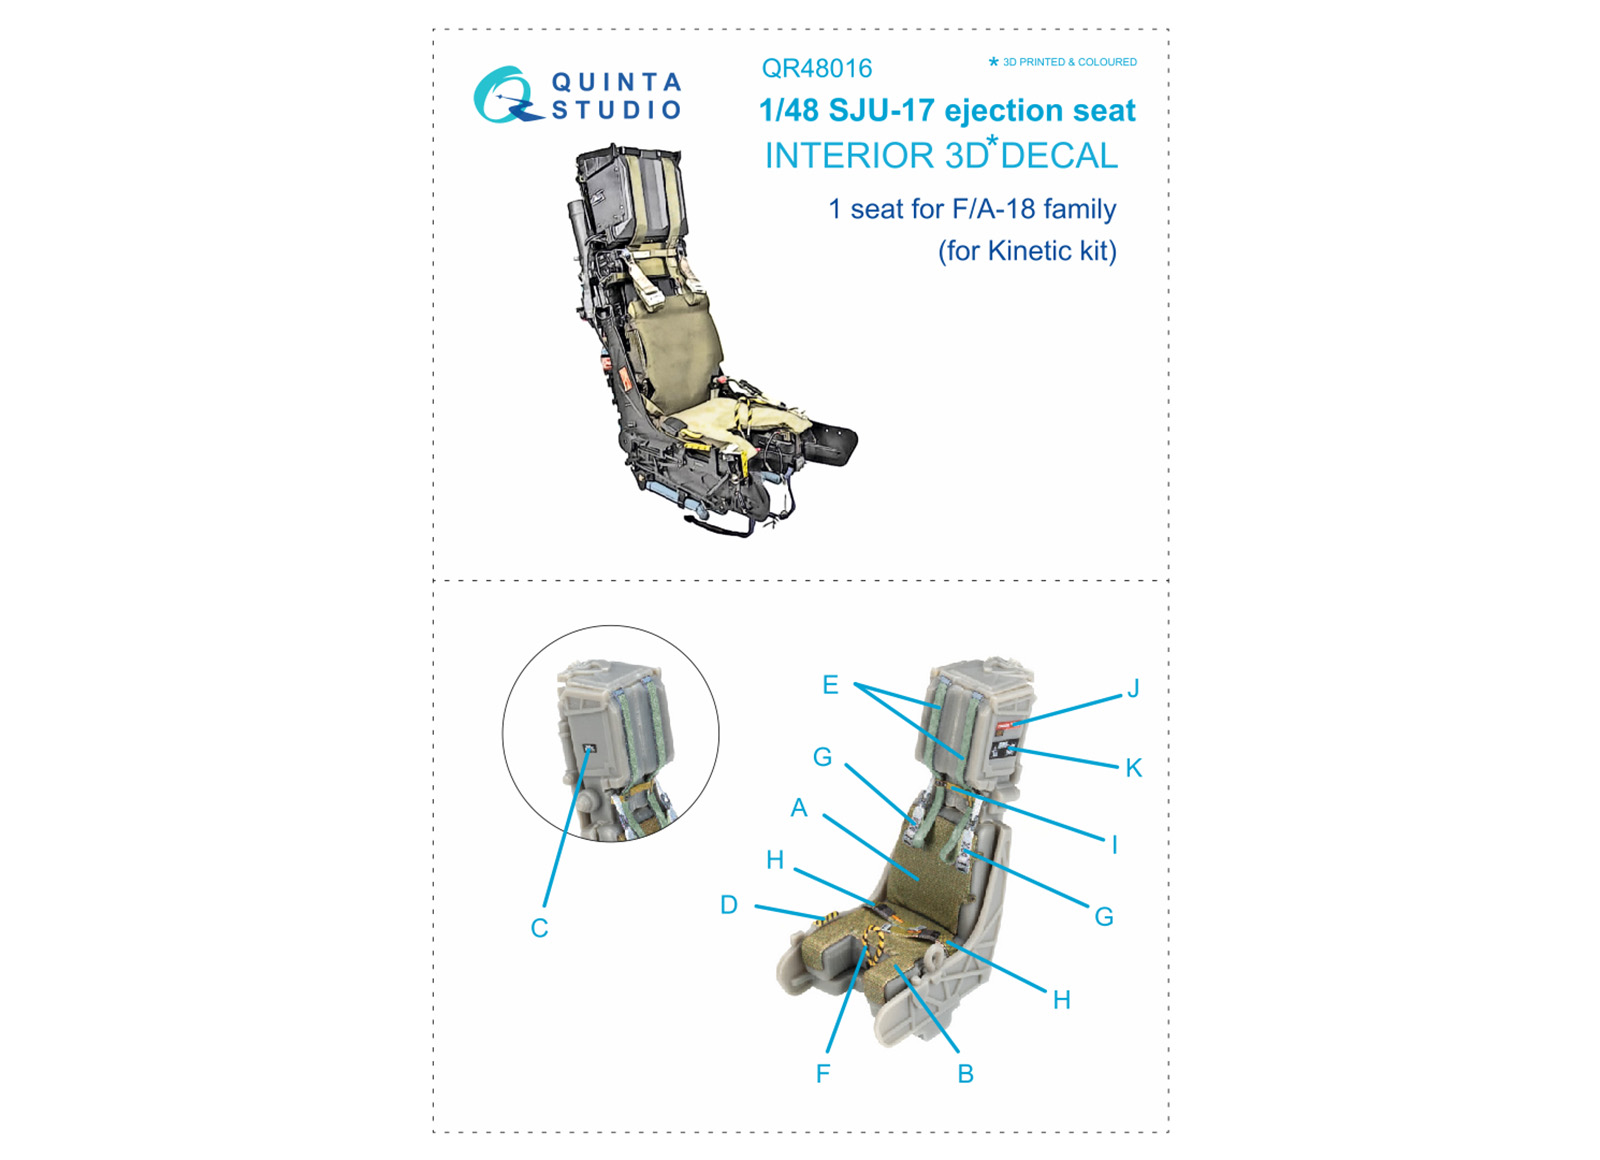 SJU-17 ejection seat for F/A-18 family (Kinetic)